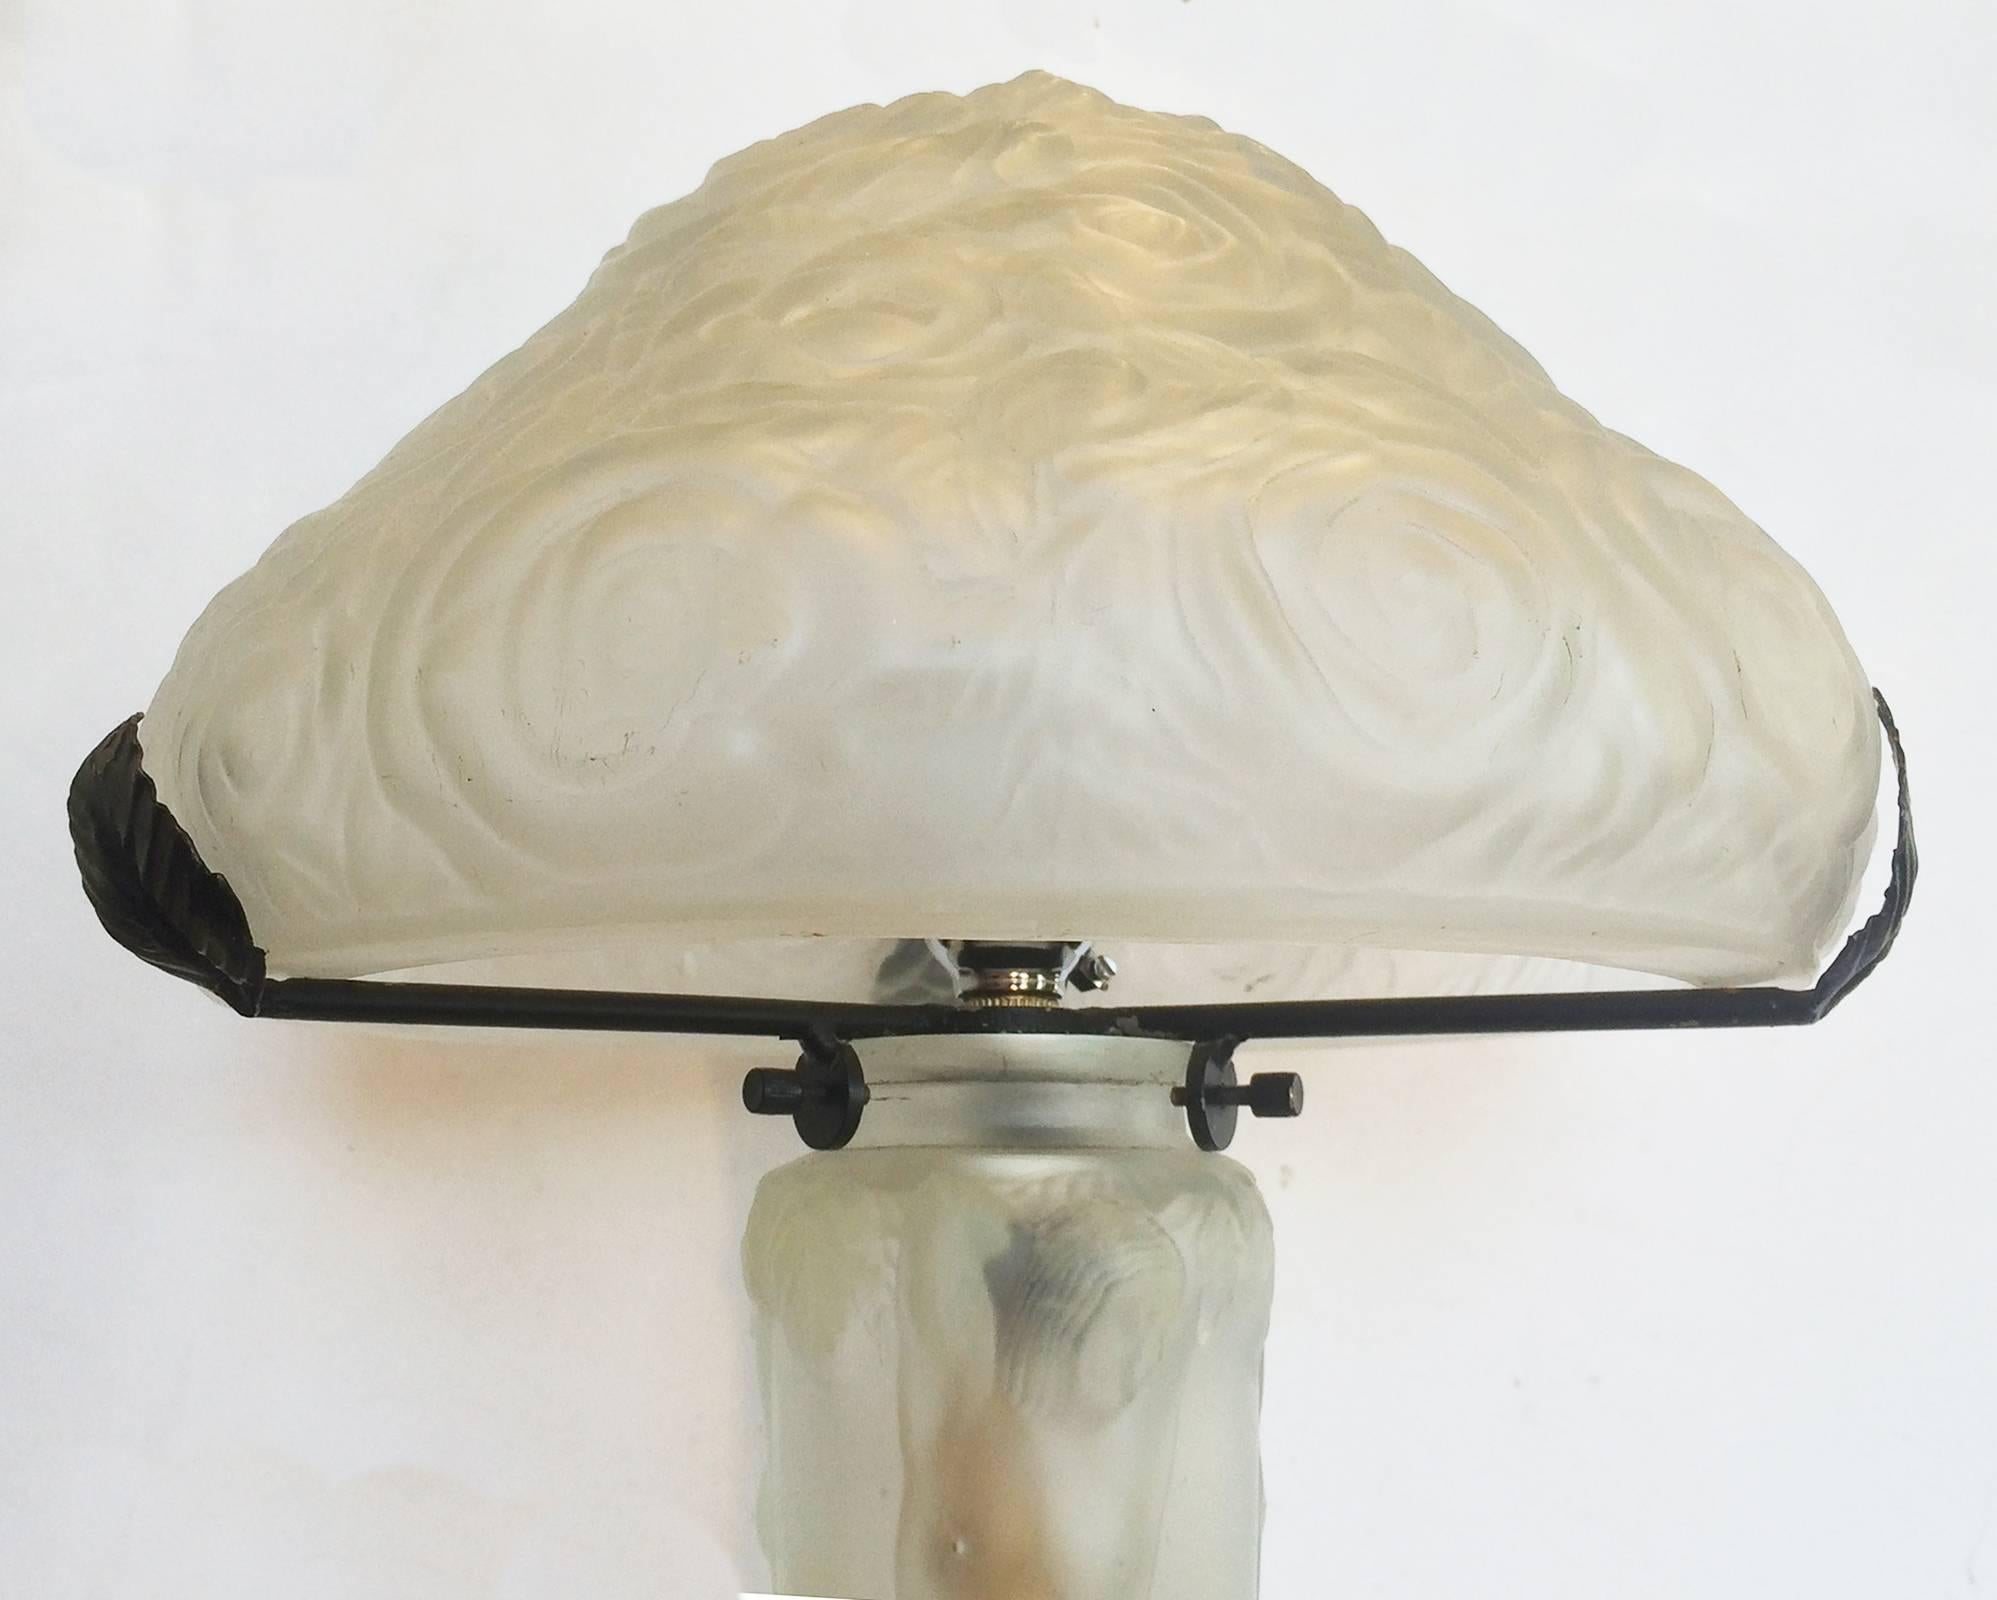 Art Deco lamp in satin clear glass, in design of roses and nudes. This lamp is of the rarer double light design, having a light in the upper shade and one also within the column support. The shade has Roses covering all the surface and is supported